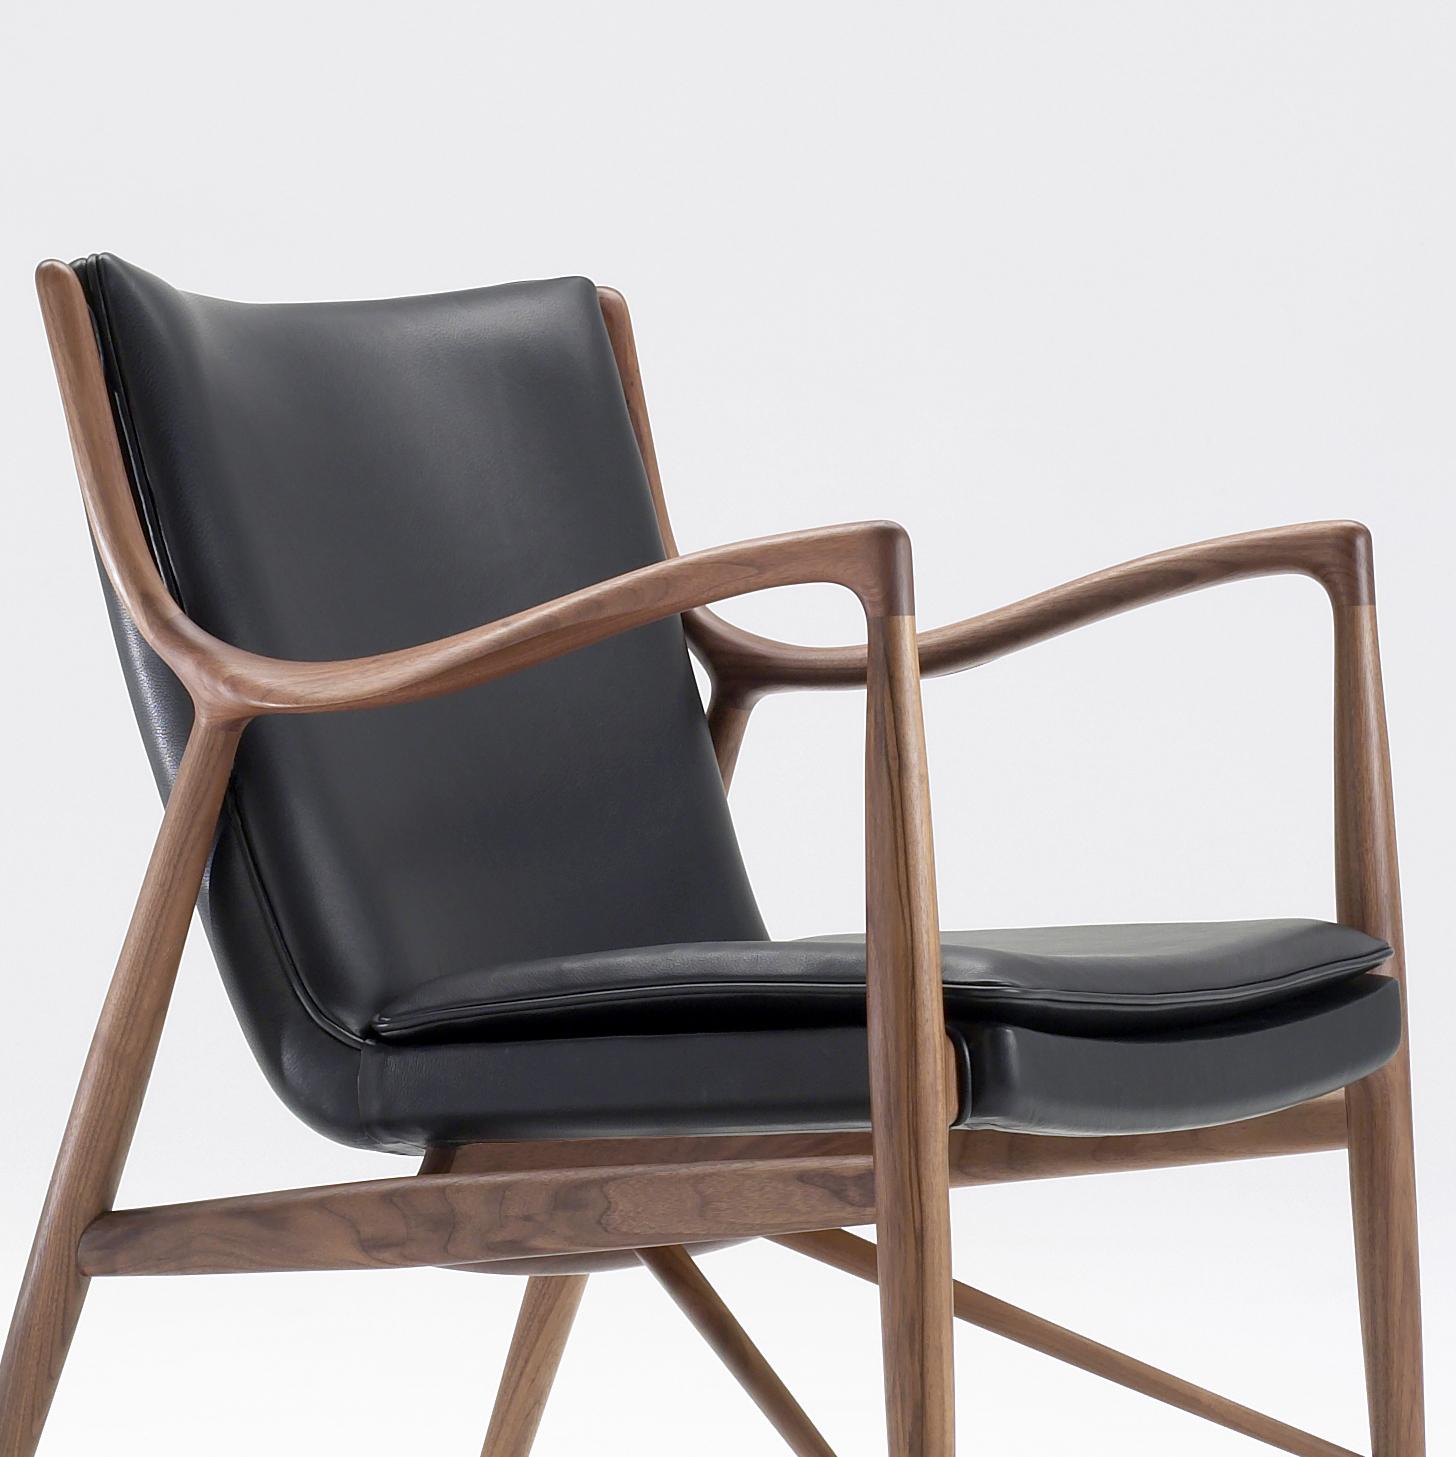 Contemporary Finn Juhl 45 Chair, Wood and Black Leather